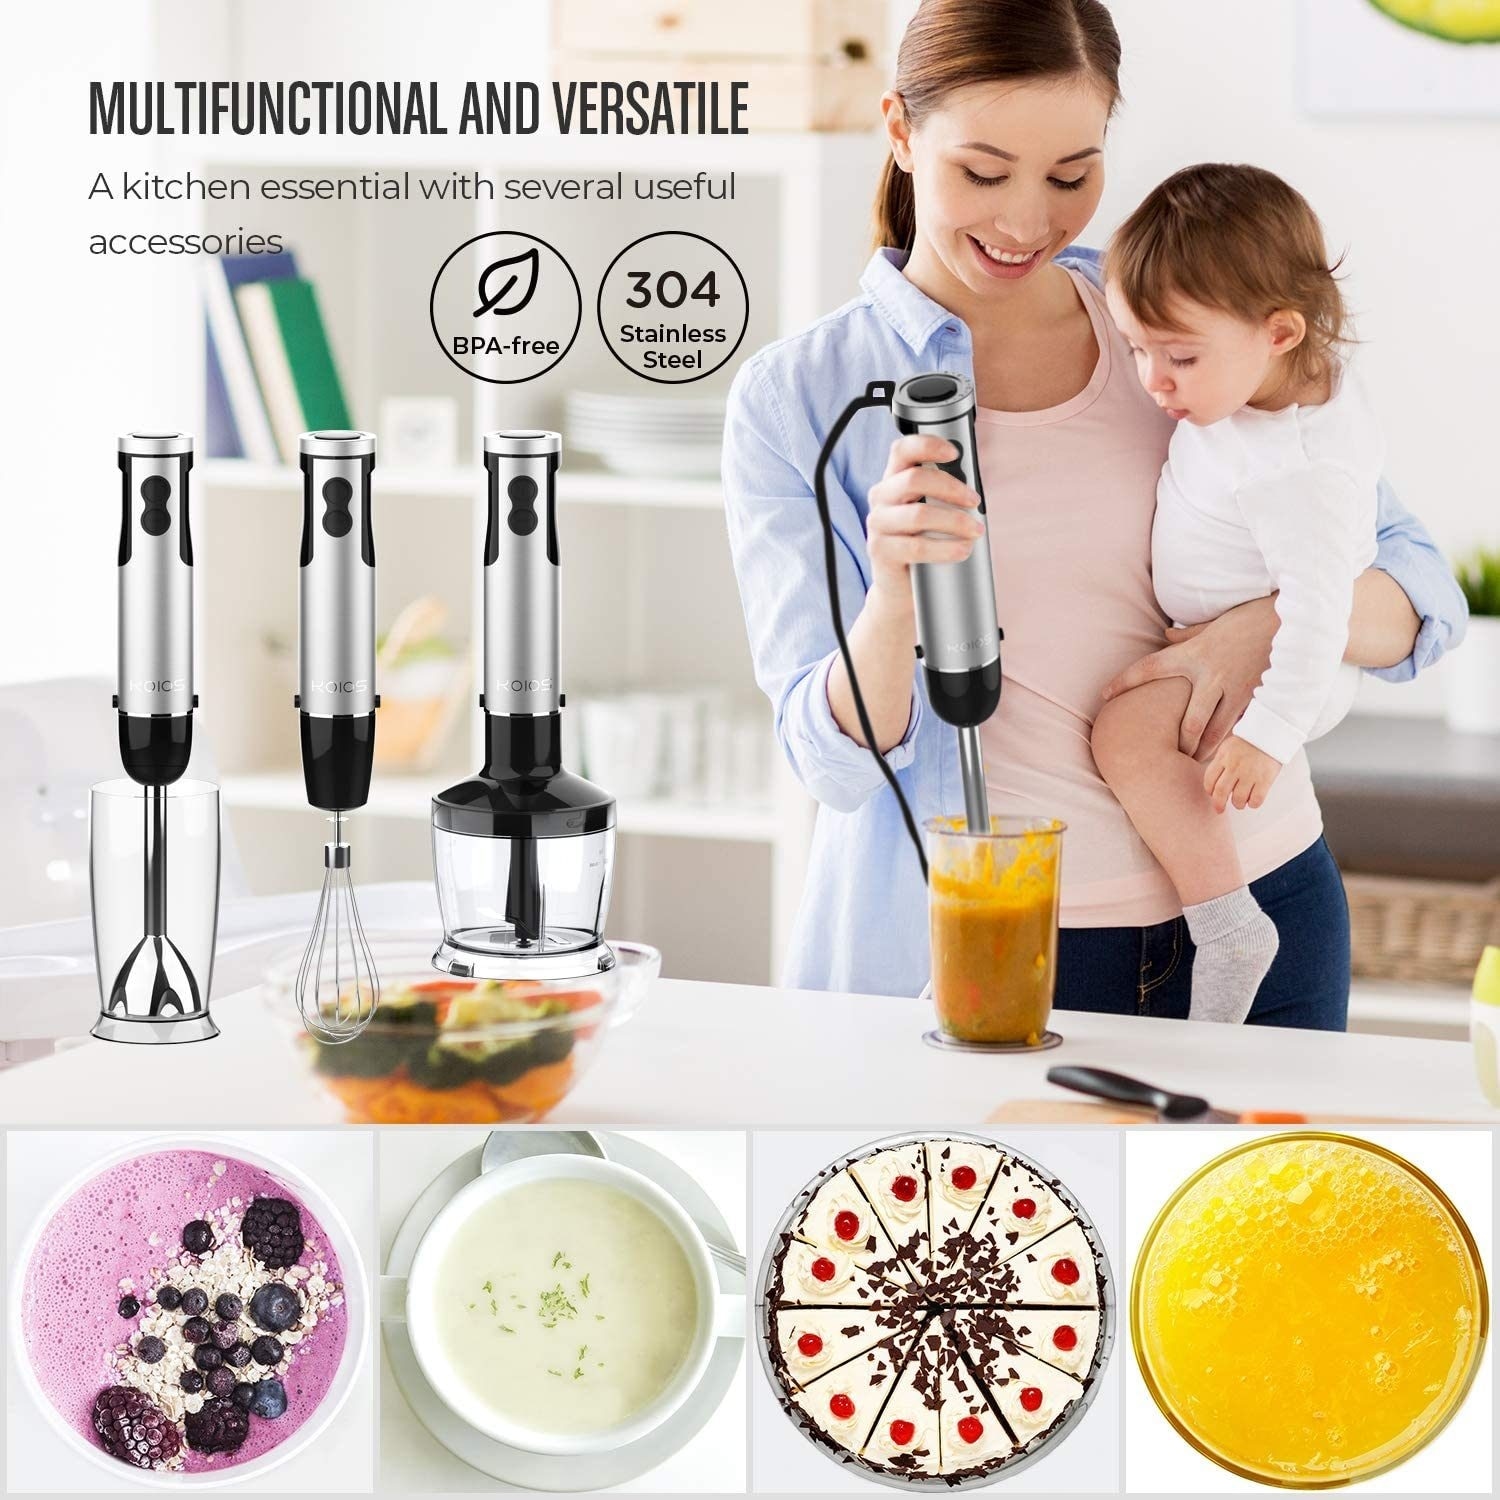 KOIOS 800 Watt Electric 4 in 1 Immersion Hand Blender Kitchen Applianc –  Tuesday Morning